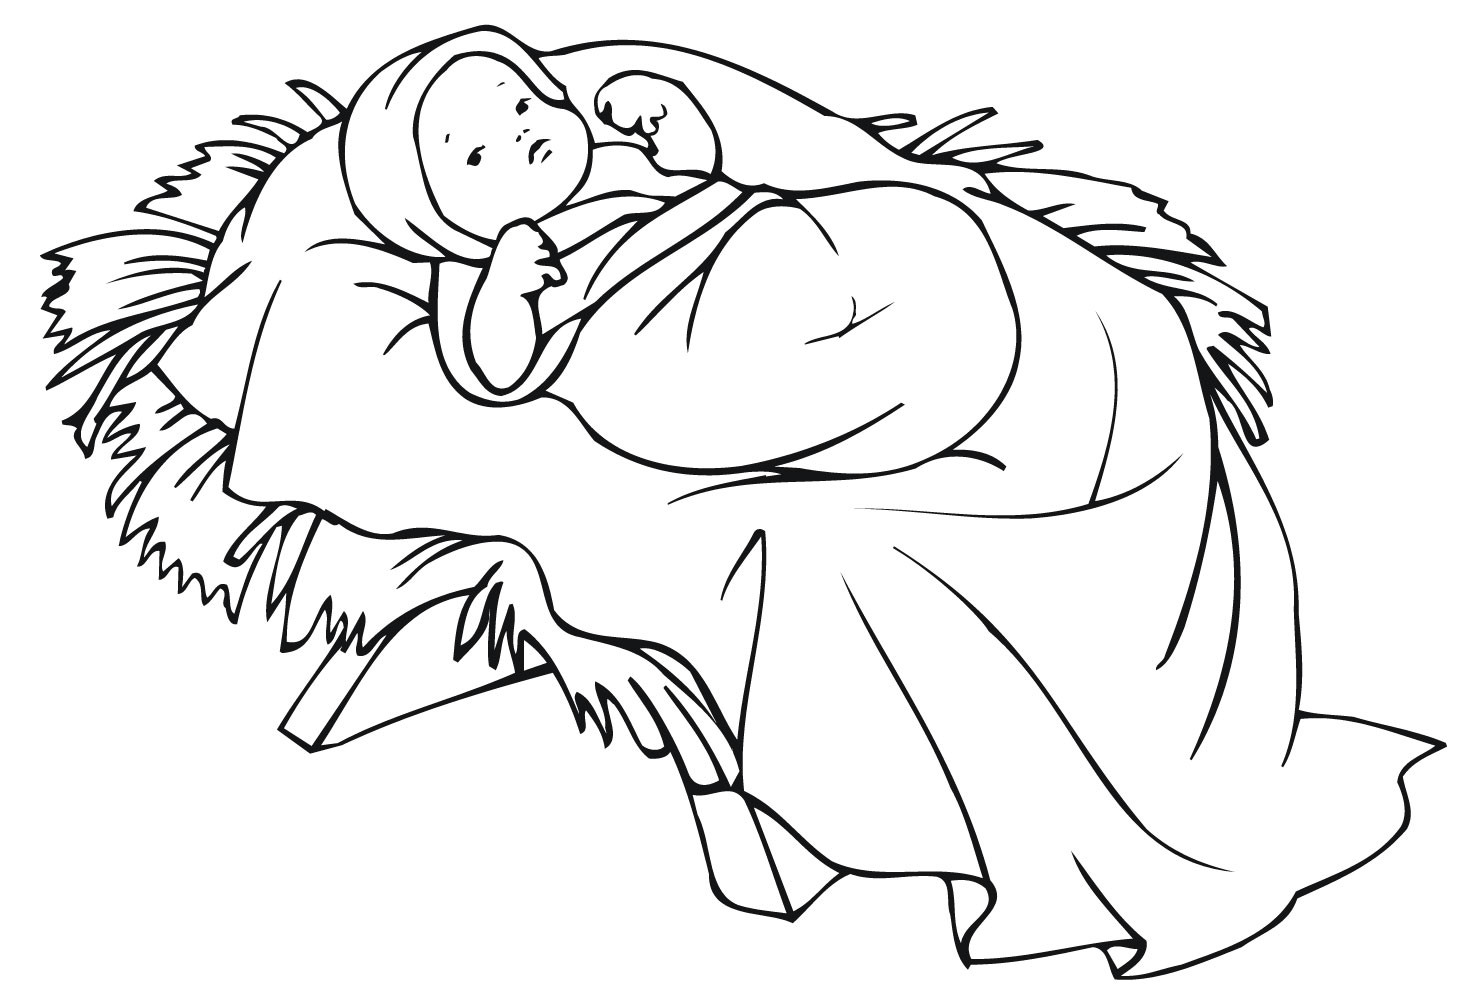 Baby Jesus Coloring Page
 XMAS COLORING PAGES